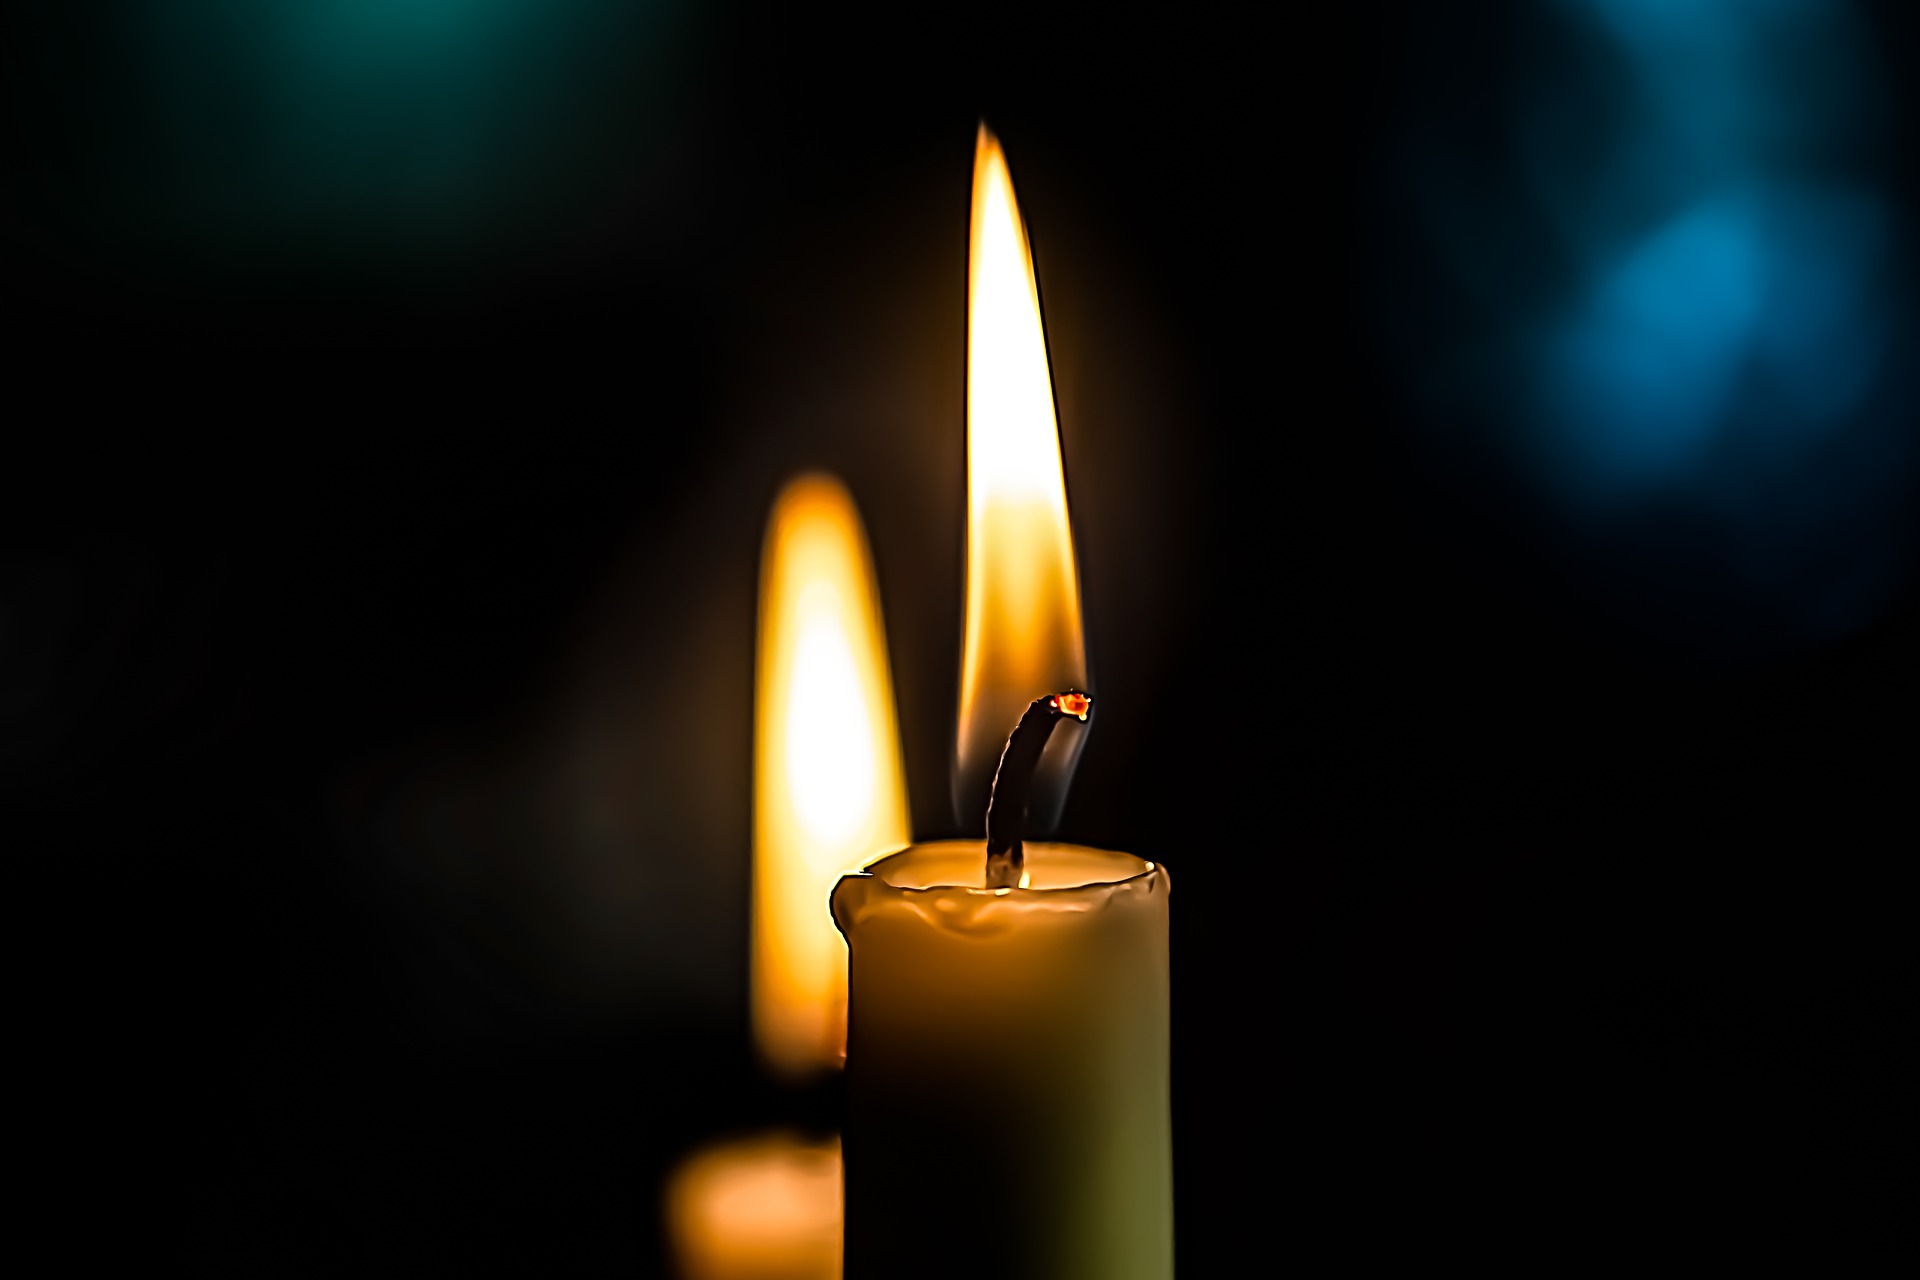 burning-candles-g82c4f69a0_1920